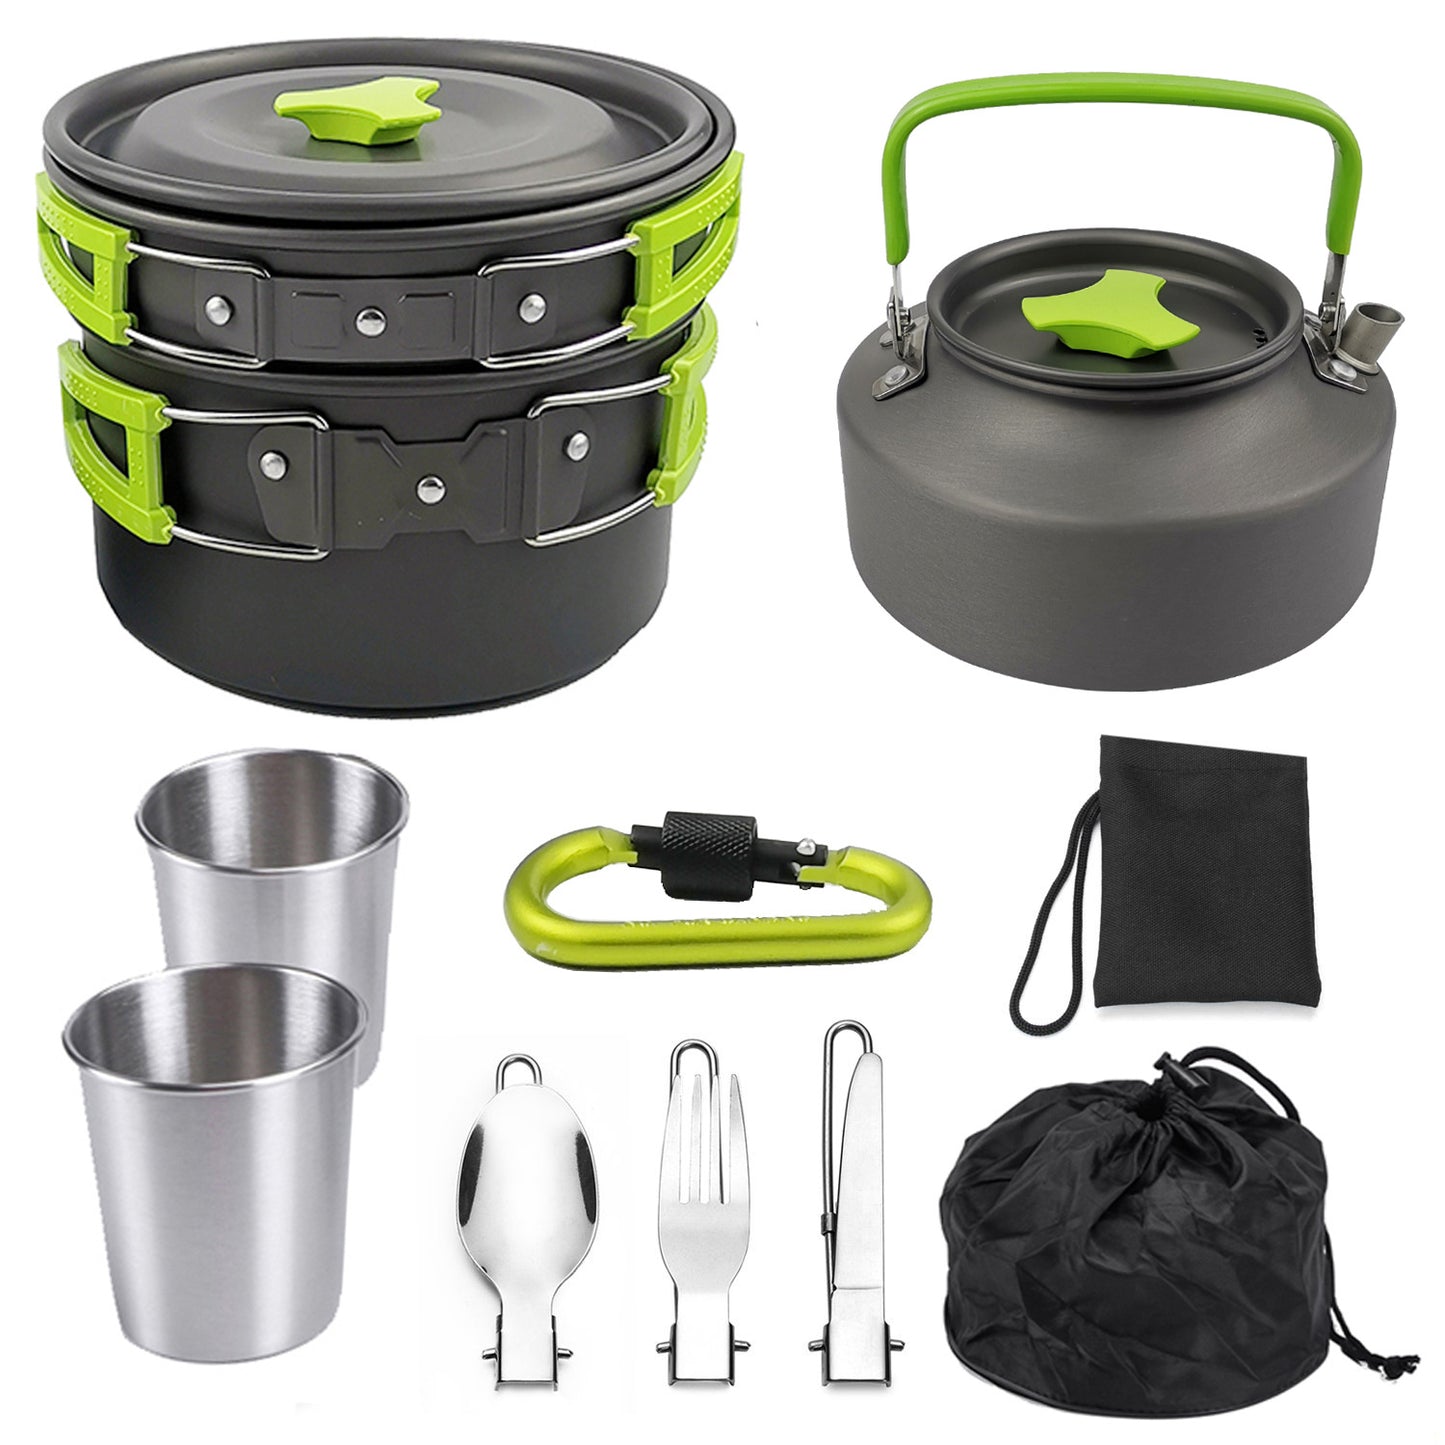 Feast in the Wild: Sleek & Lightweight Outdoor Portable Cookware Mess Kit - Your Culinary Companion